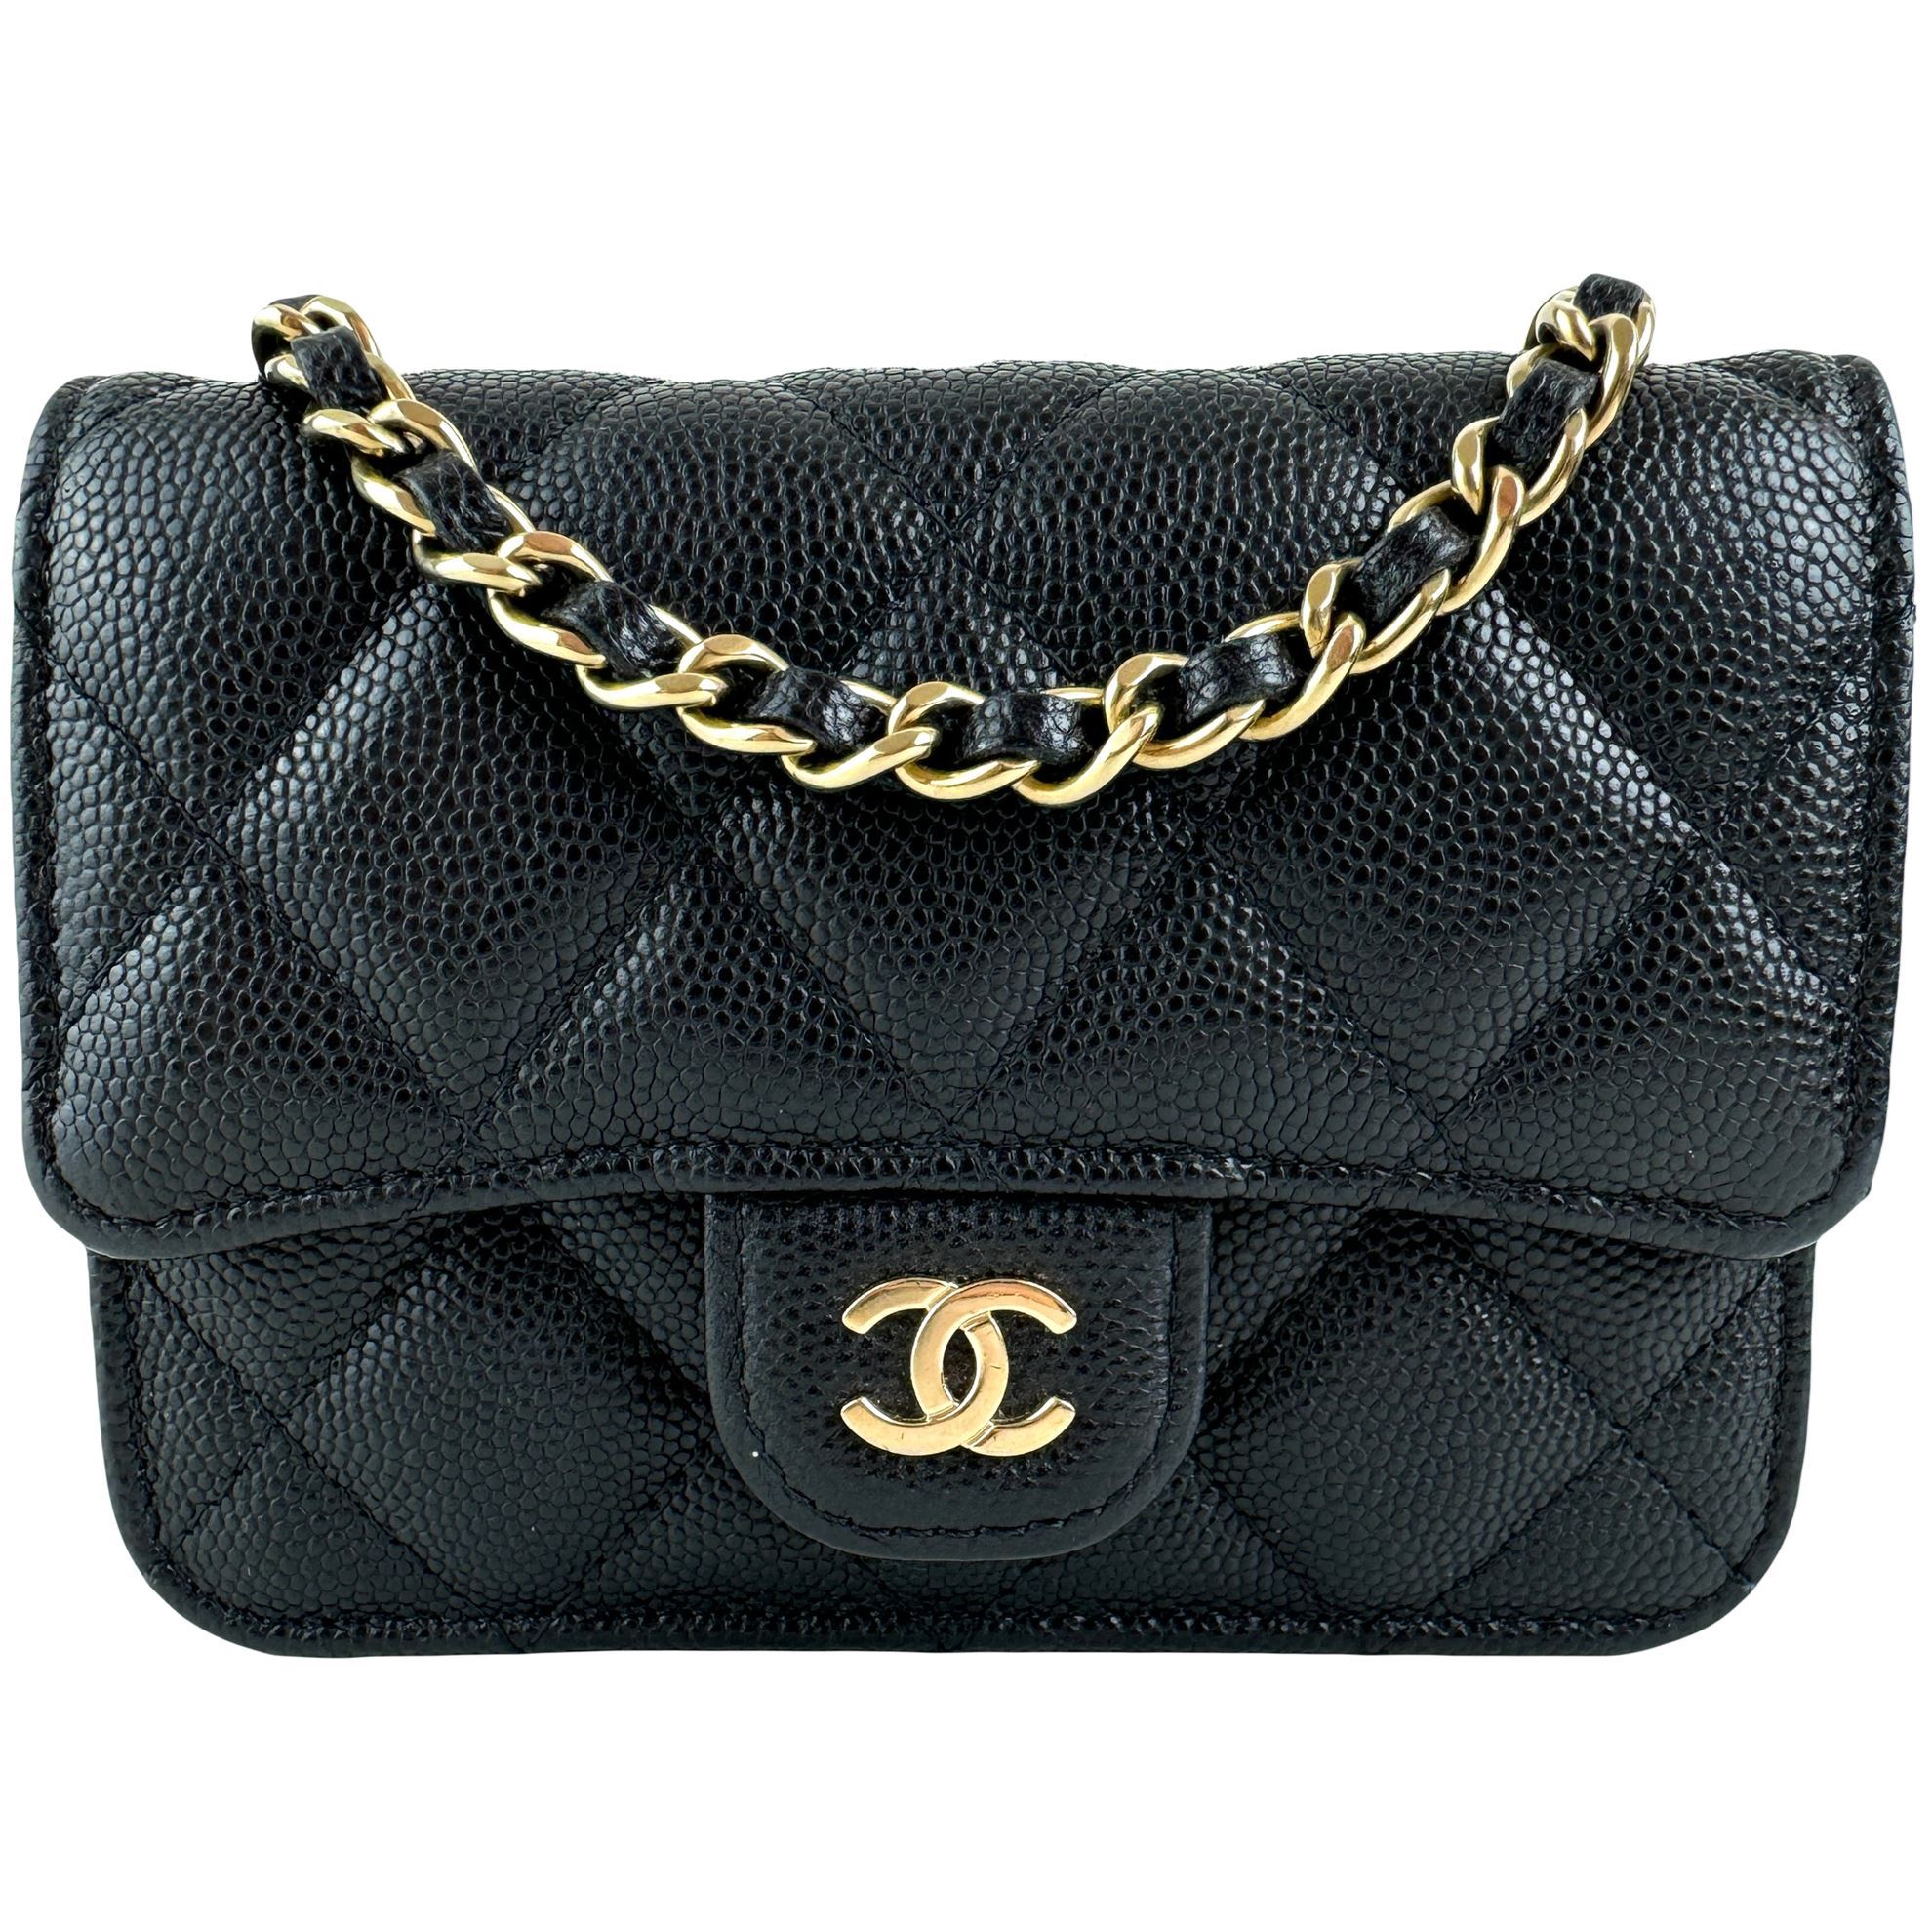 Picture of Chanel 2.55 classic timeless black caviar leather mini crossbody bag VM221279